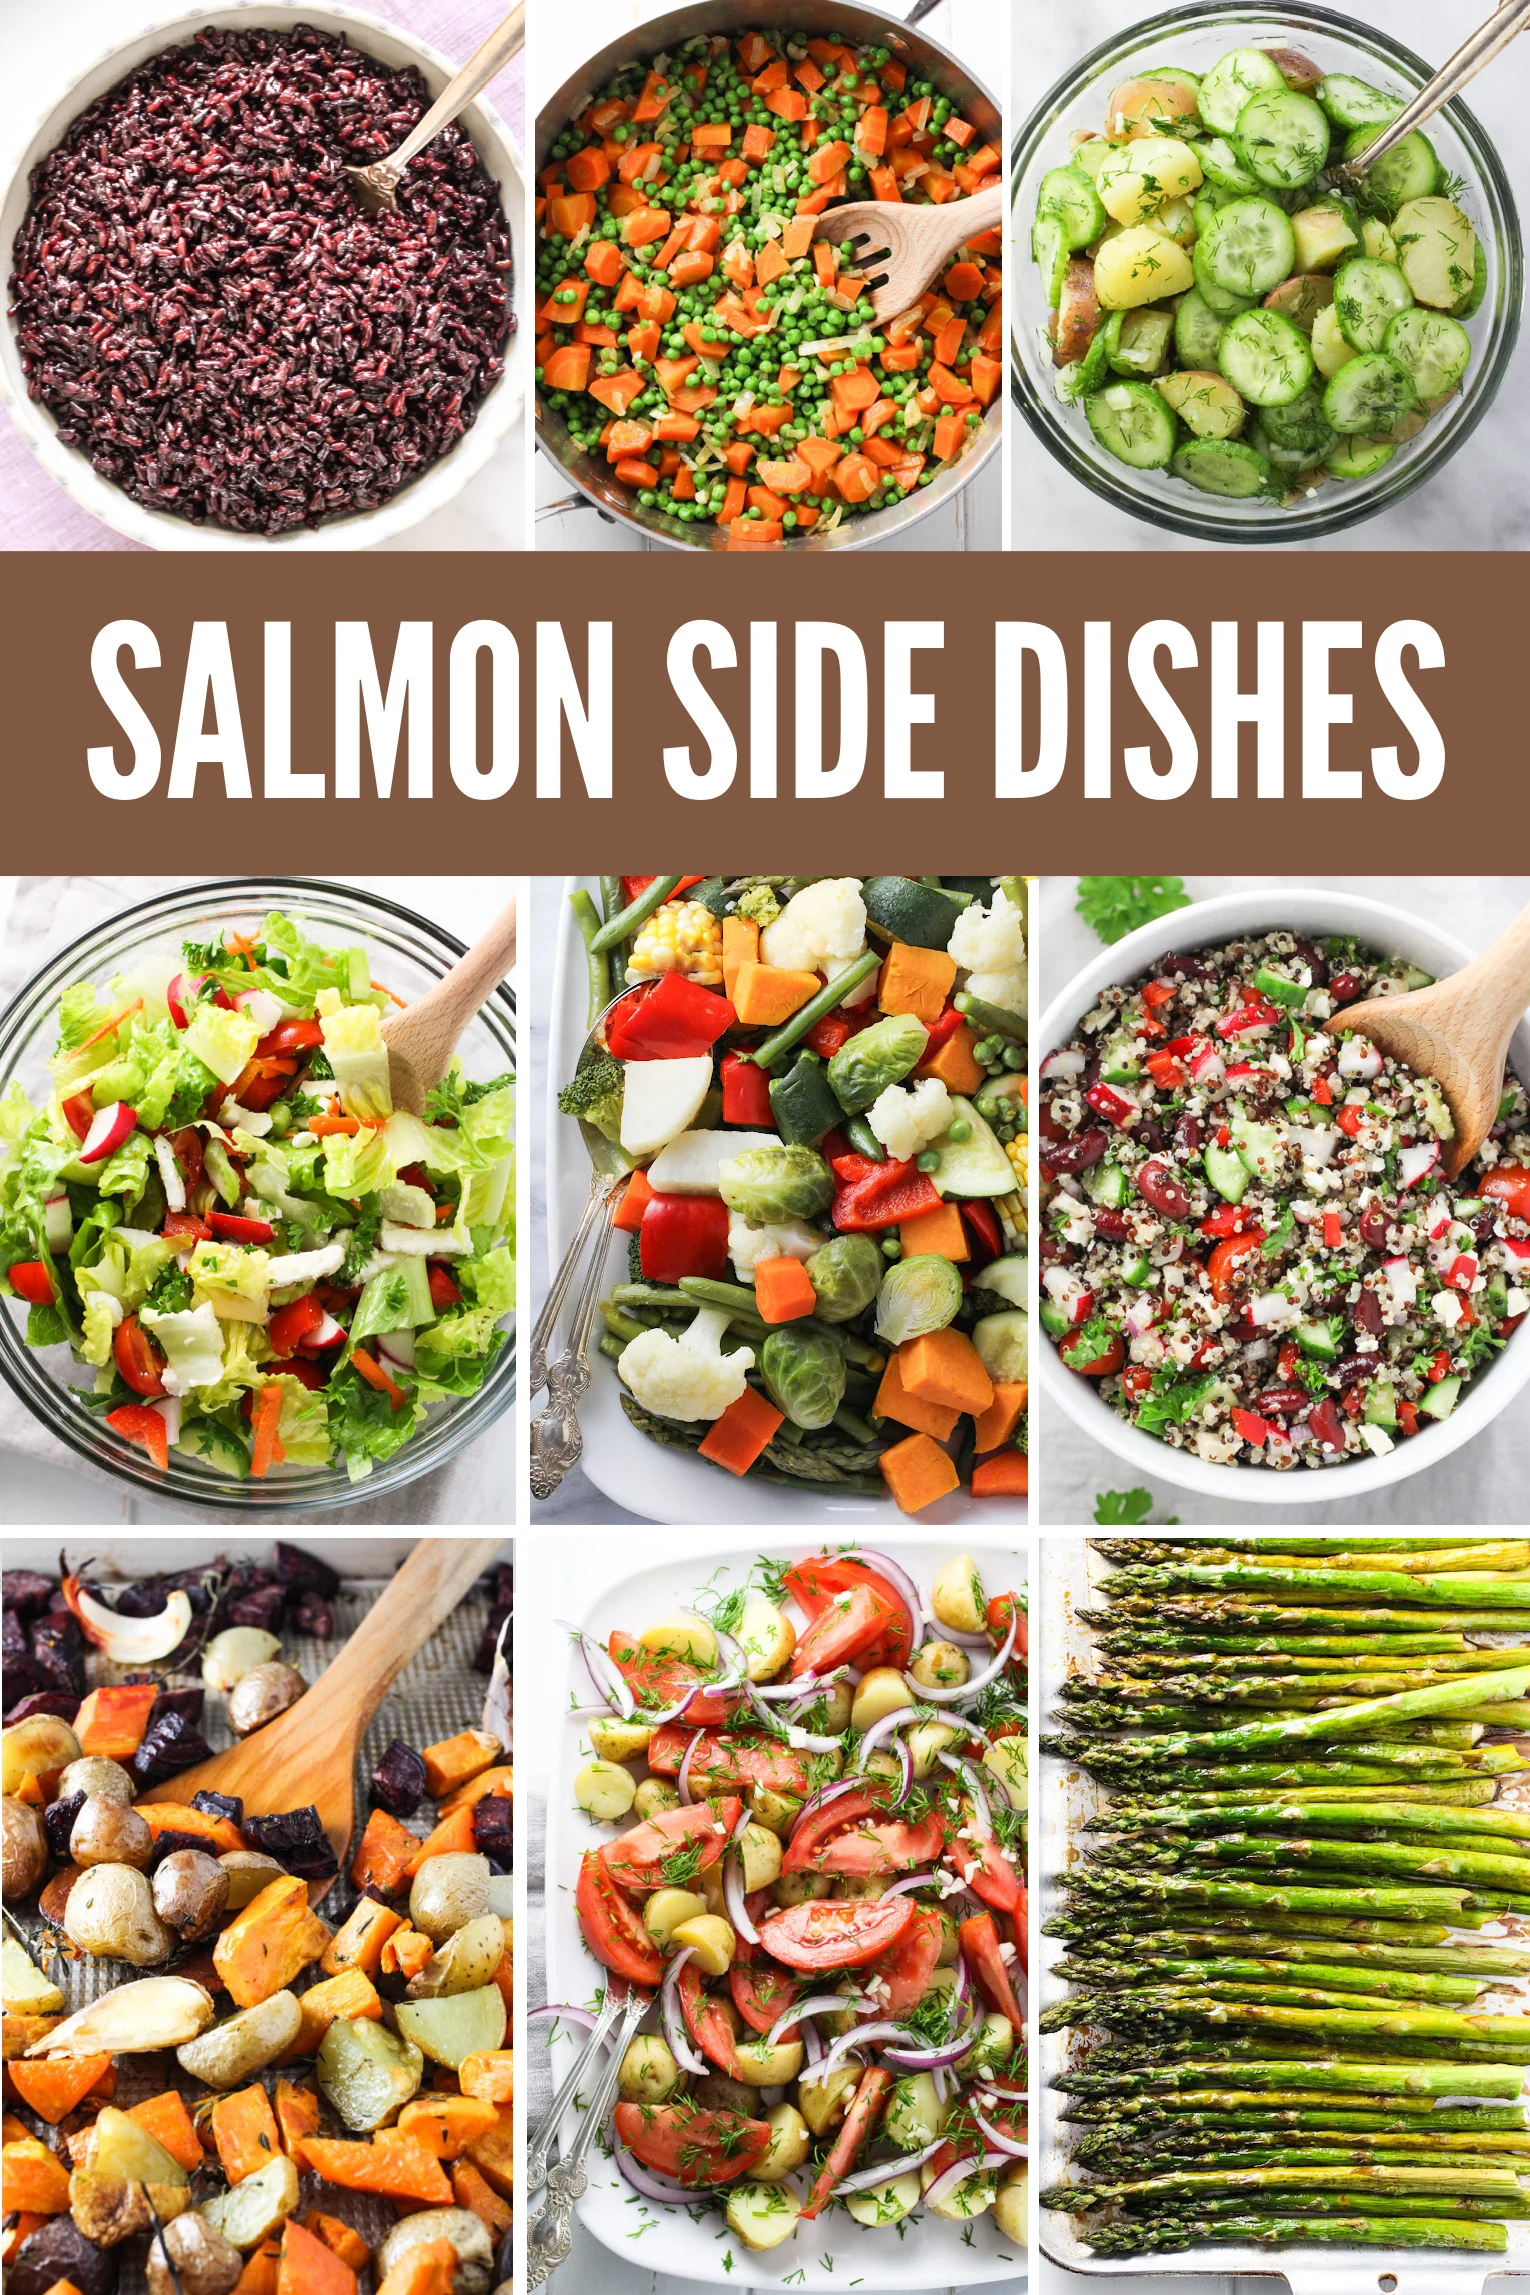 A collage of side dishes to serve with salmon including, black rice, peas and carrots, potato cucumber salad, romaine salad, steamed vegetables, quinoa salad, roasted vegetables, tomato salad, and asparagus. There is a text overlay, saying: salmon side dishes.